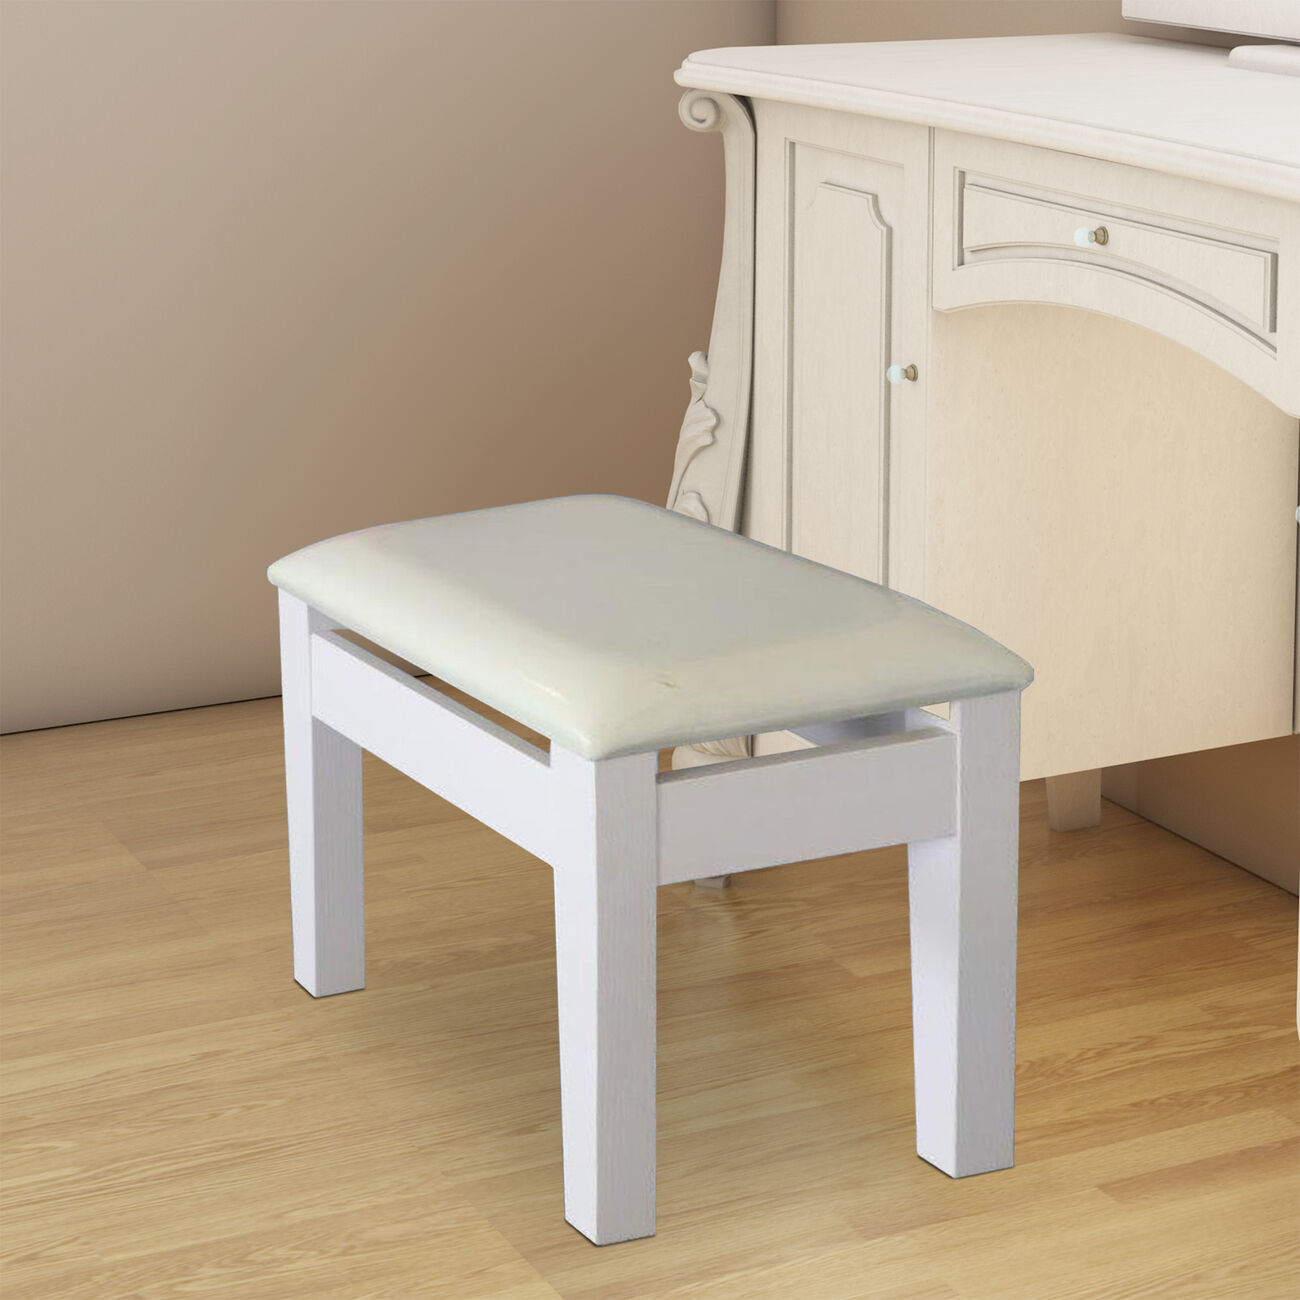 Dressing Stool With Padded Upholstery, White